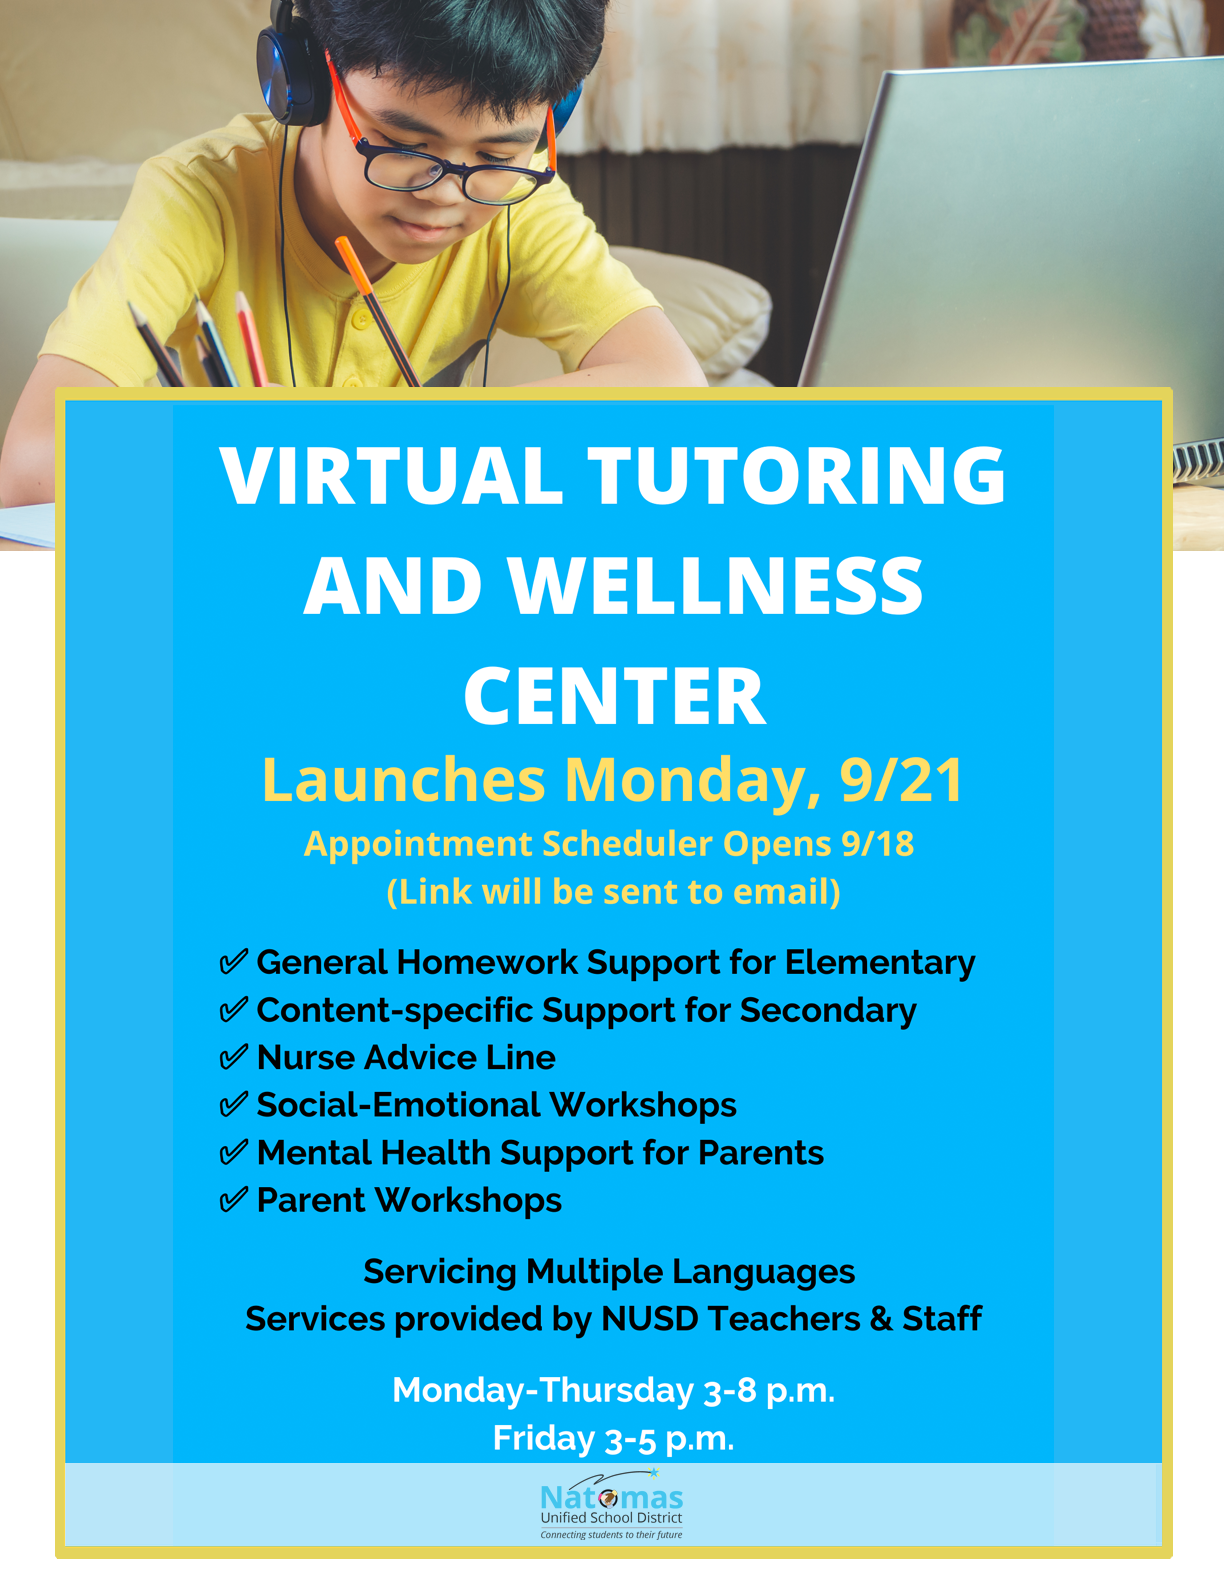 Virtual Tutoring and Wellness Center Flyer with Specific Details